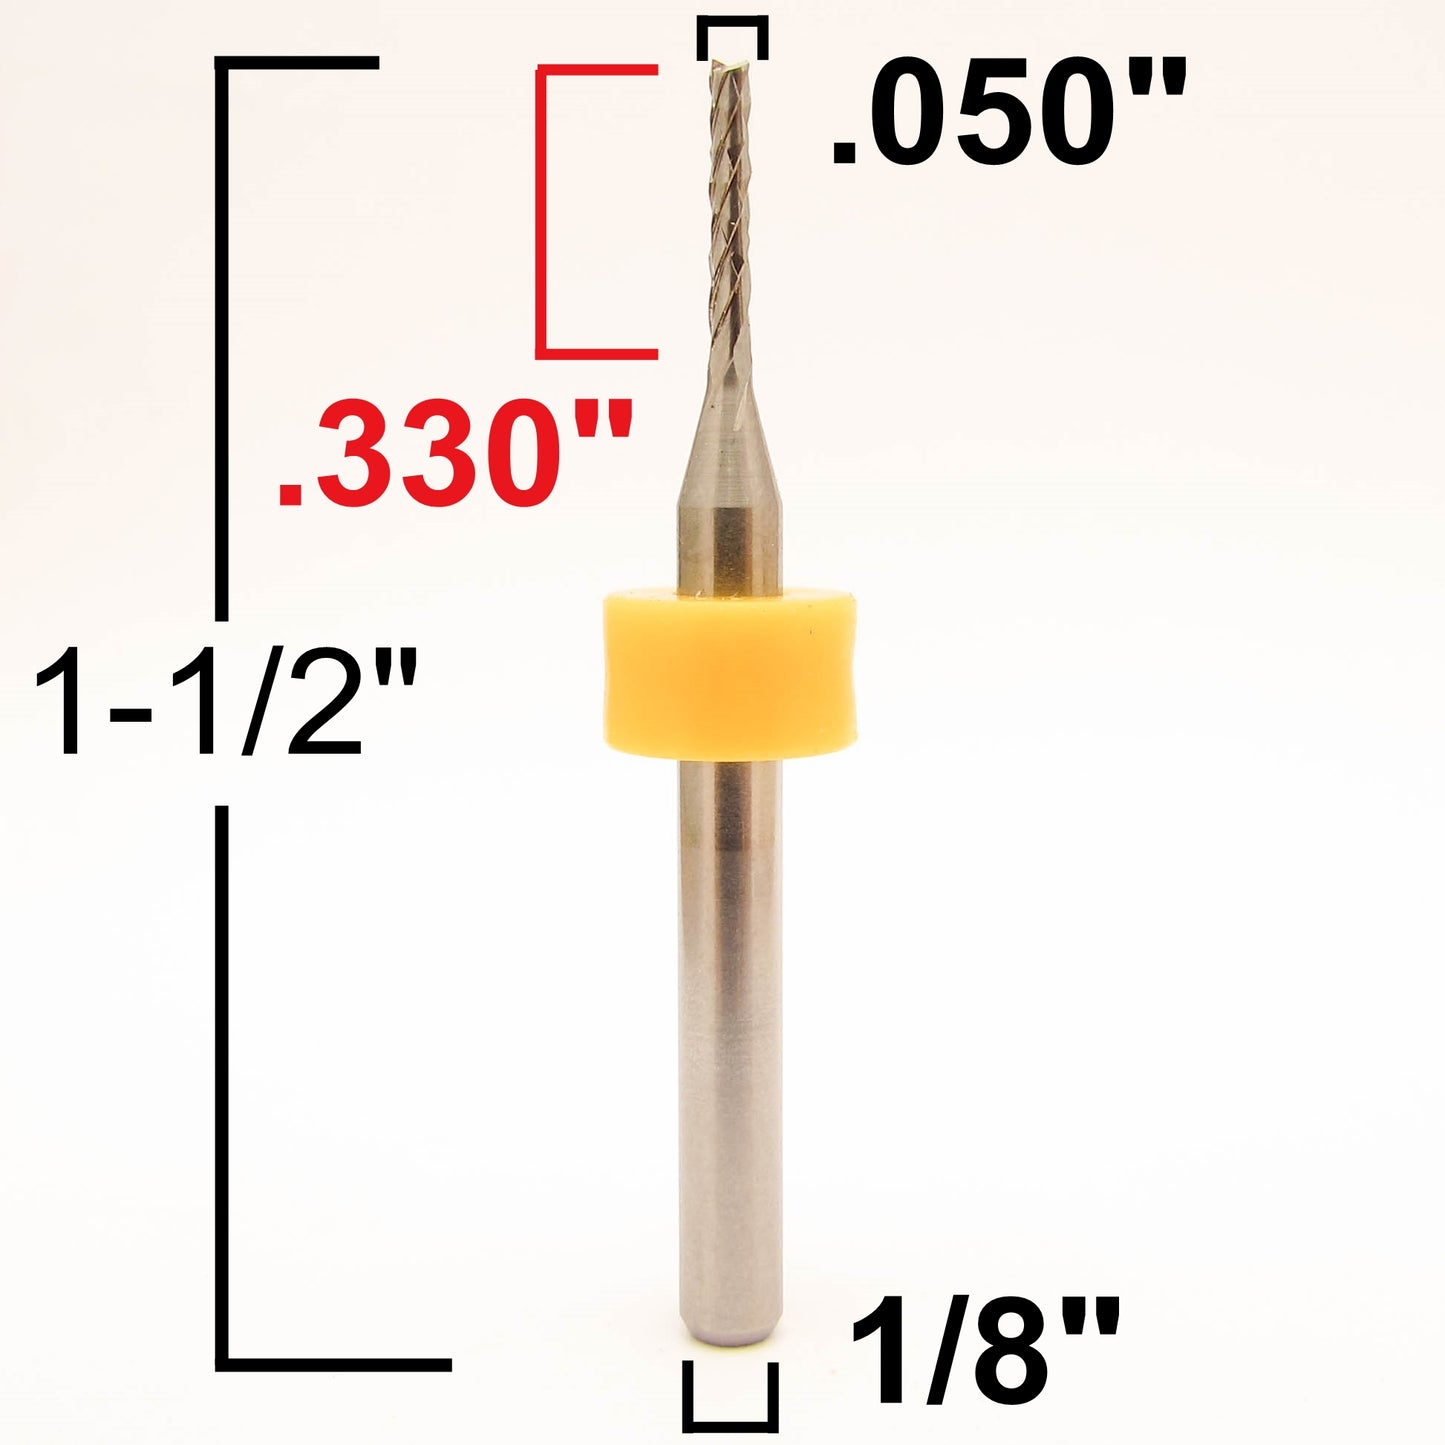 Fifty Pieces .050" Router Bits Diamond Flutes 1/8" Shanks Fish Tail Tip - Up Cut Solid Carbide - Super Value - URD120